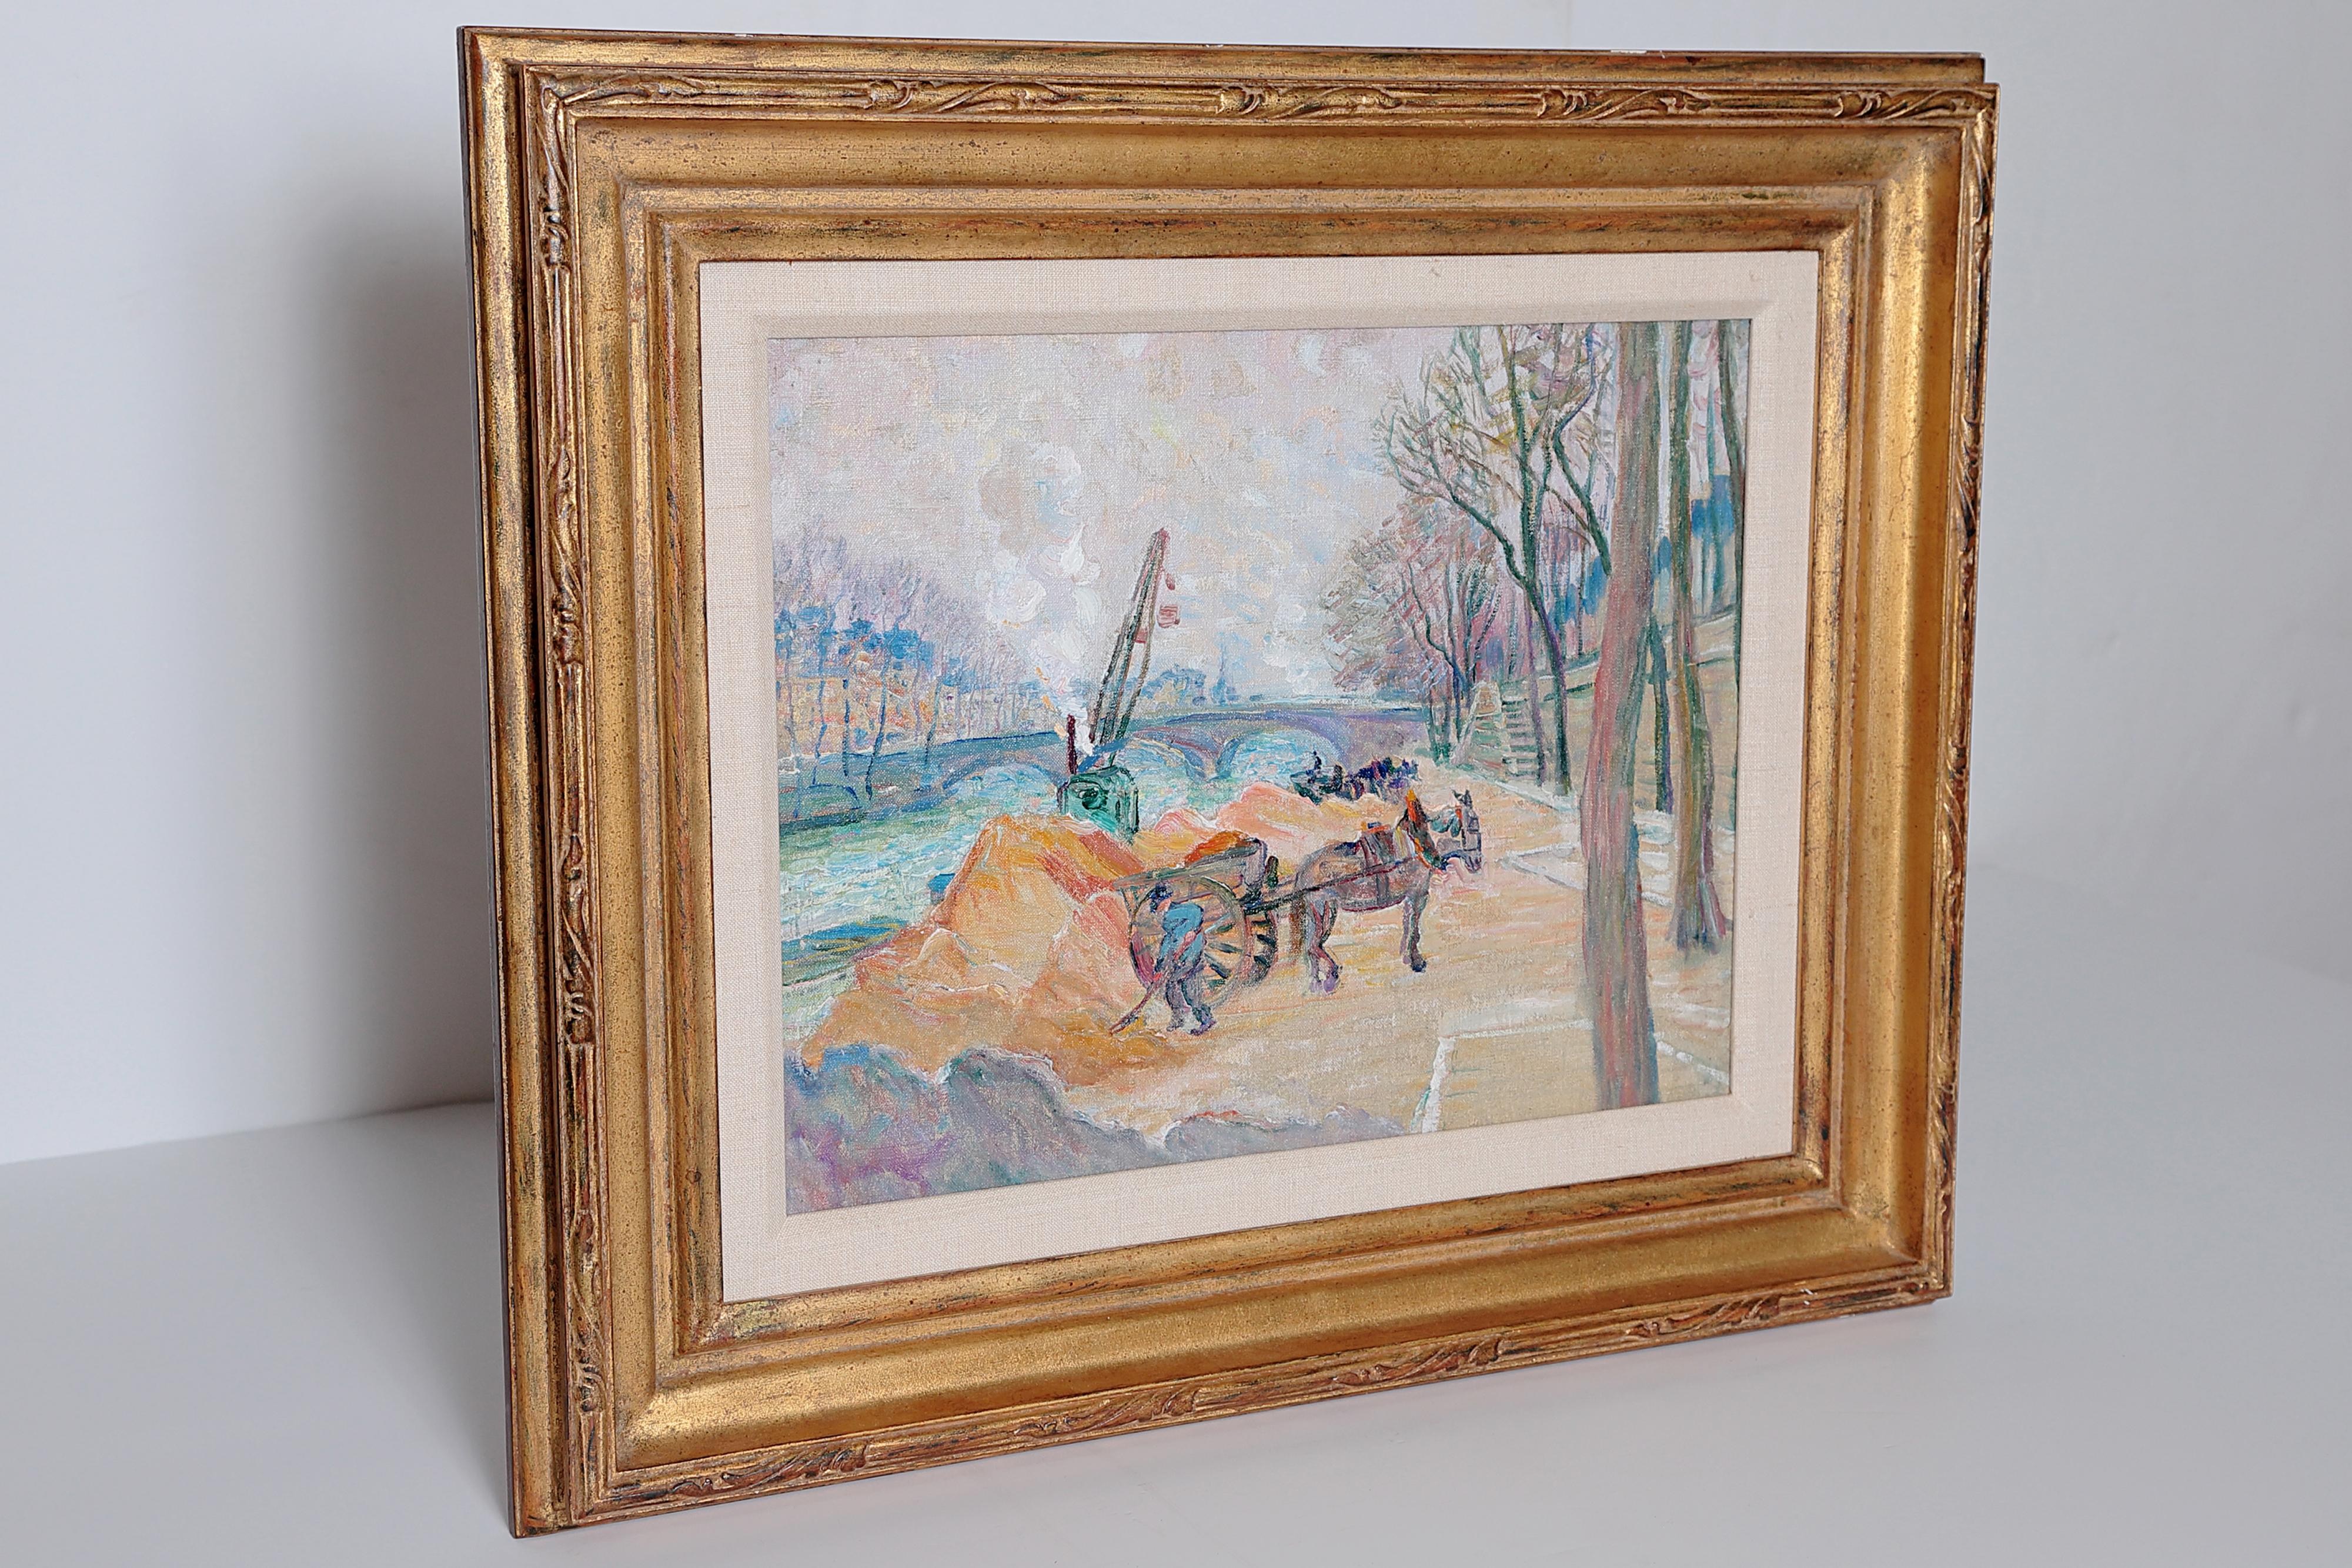 Framed oil on canvas by American artist George Brainerd Burr (1876-1939), bank of the seine, workman shoveling (with horse and cart) on the river bank in Paris with a steam shovel and bridge in the background, with 